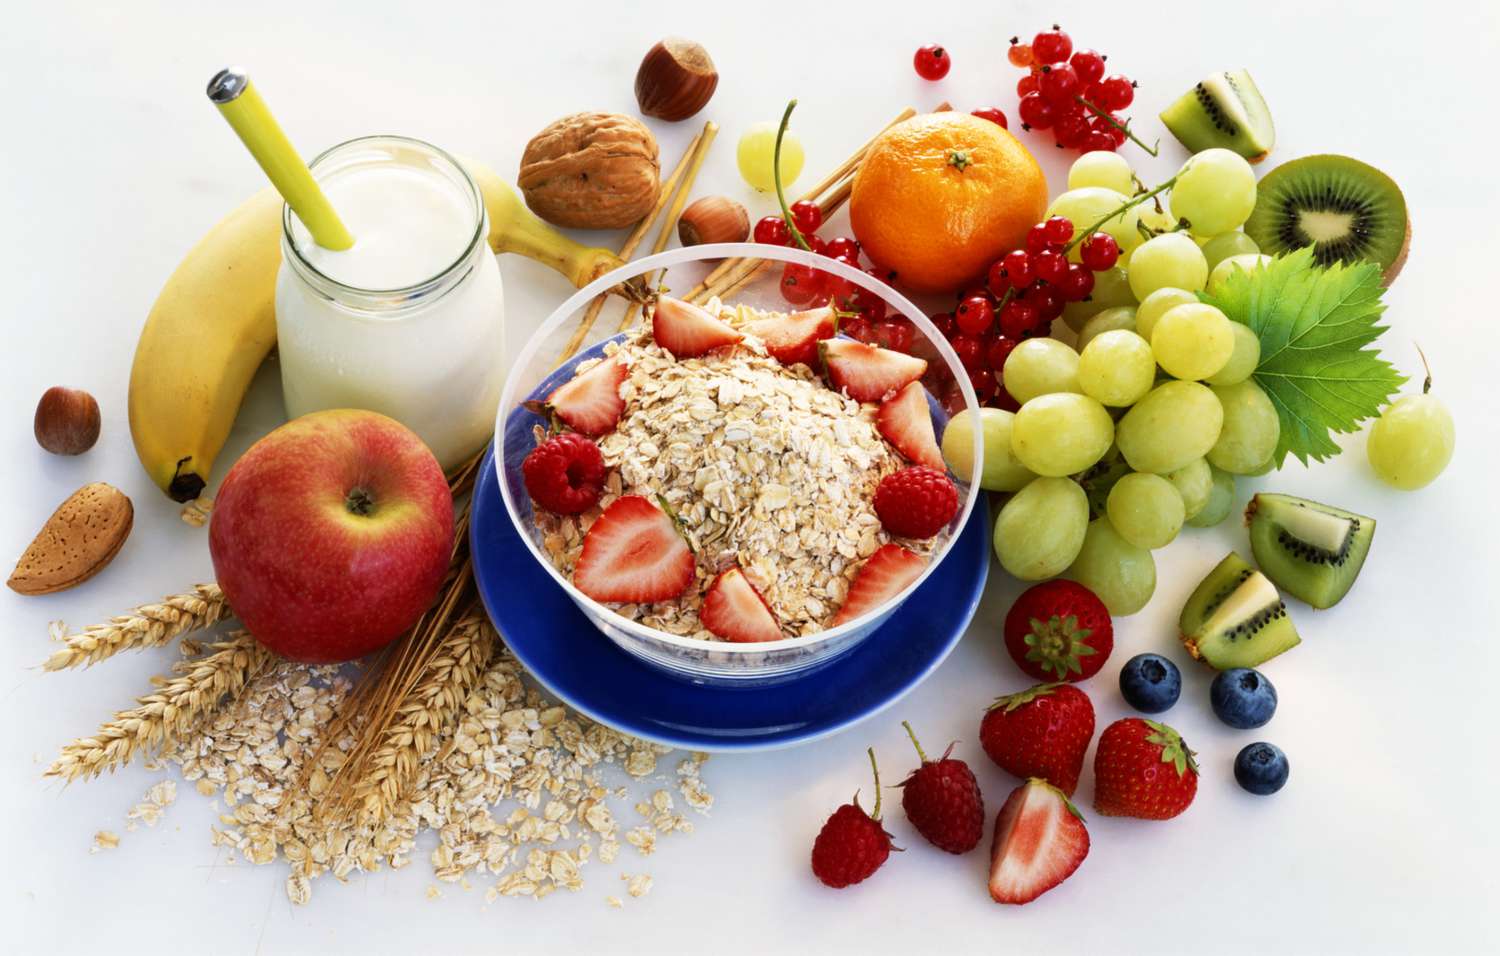 healthy breakfast foods, including fruit and oatmeal, on a white tabletop